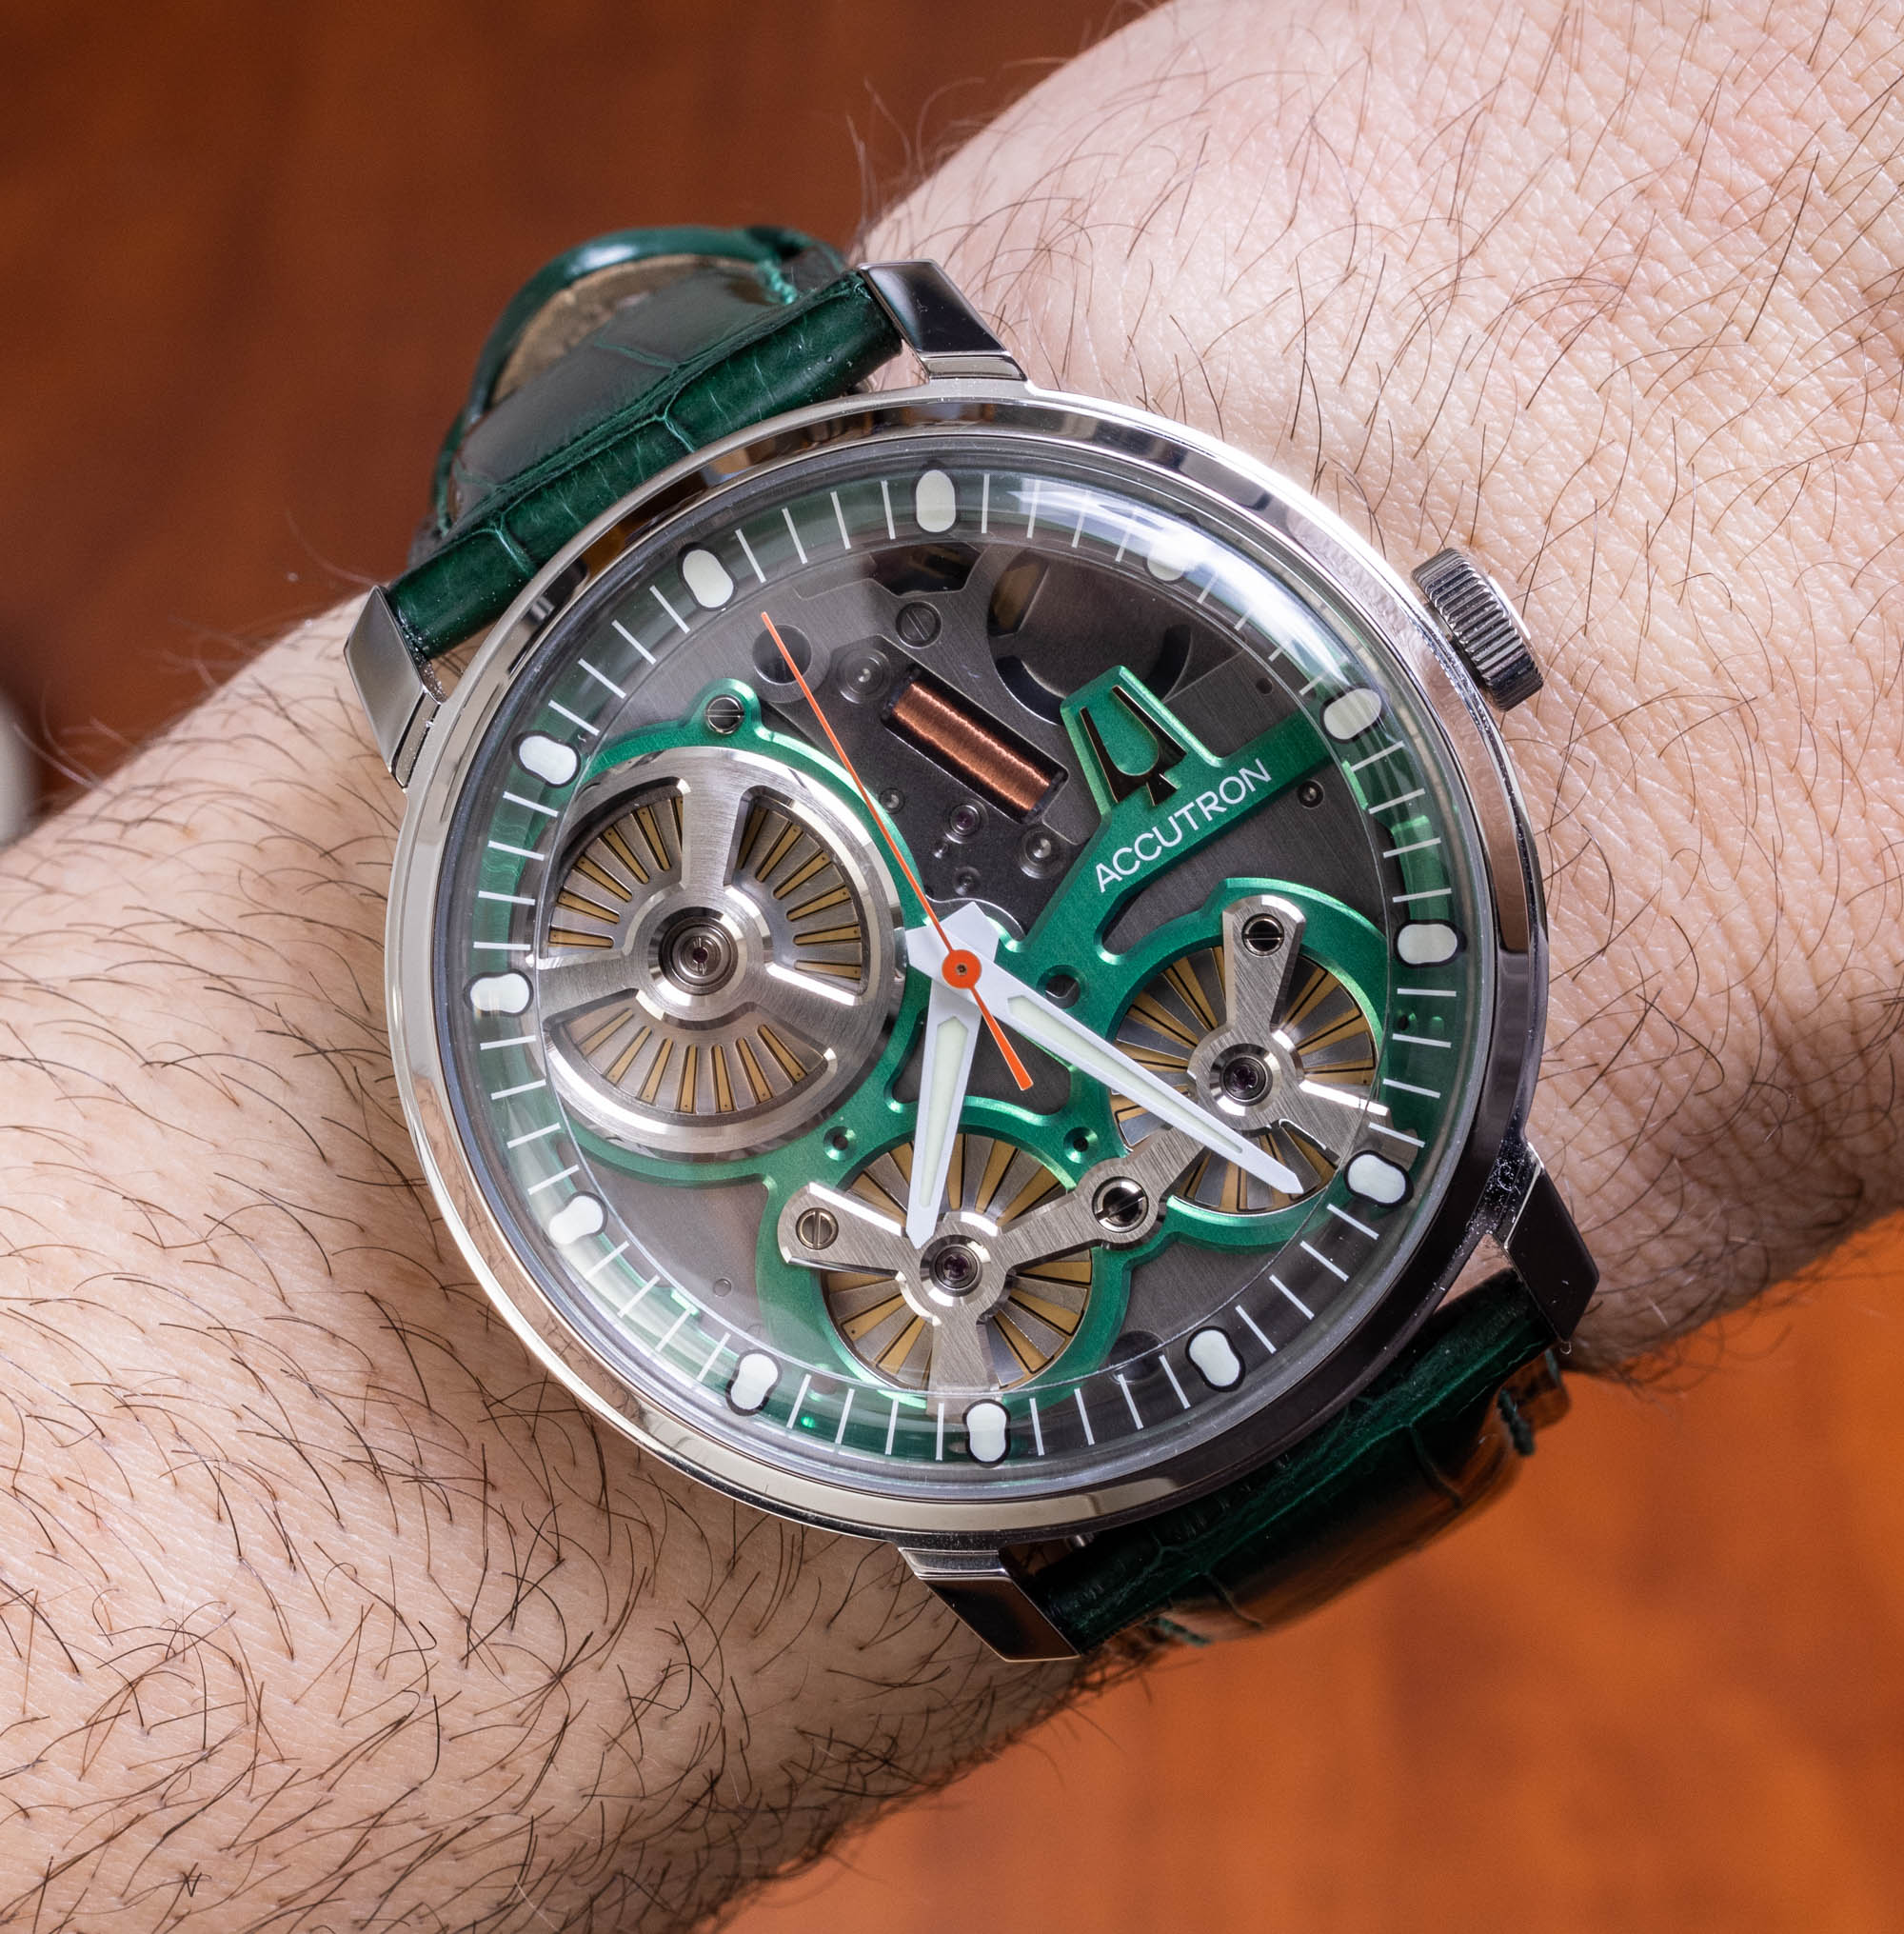 Watch Review: Accutron Spaceview 2020 With Electrostatic Power